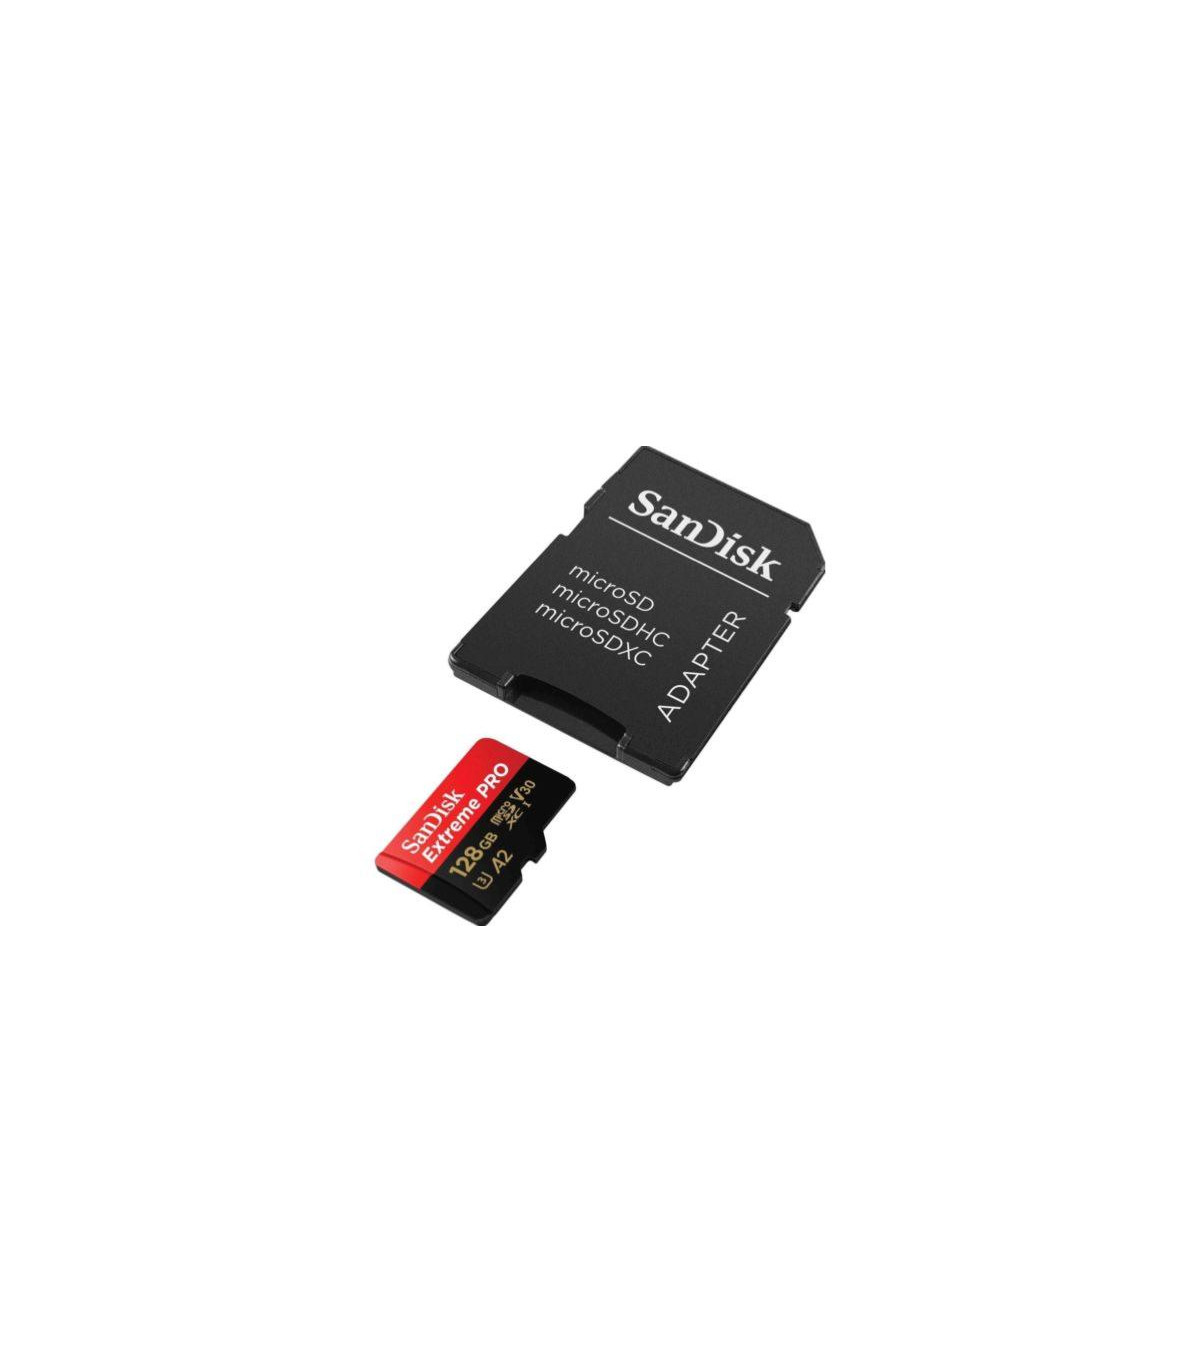 Sandisk carte Compact Flash Extreme Pro (160MO/S) 64GO - Prophot